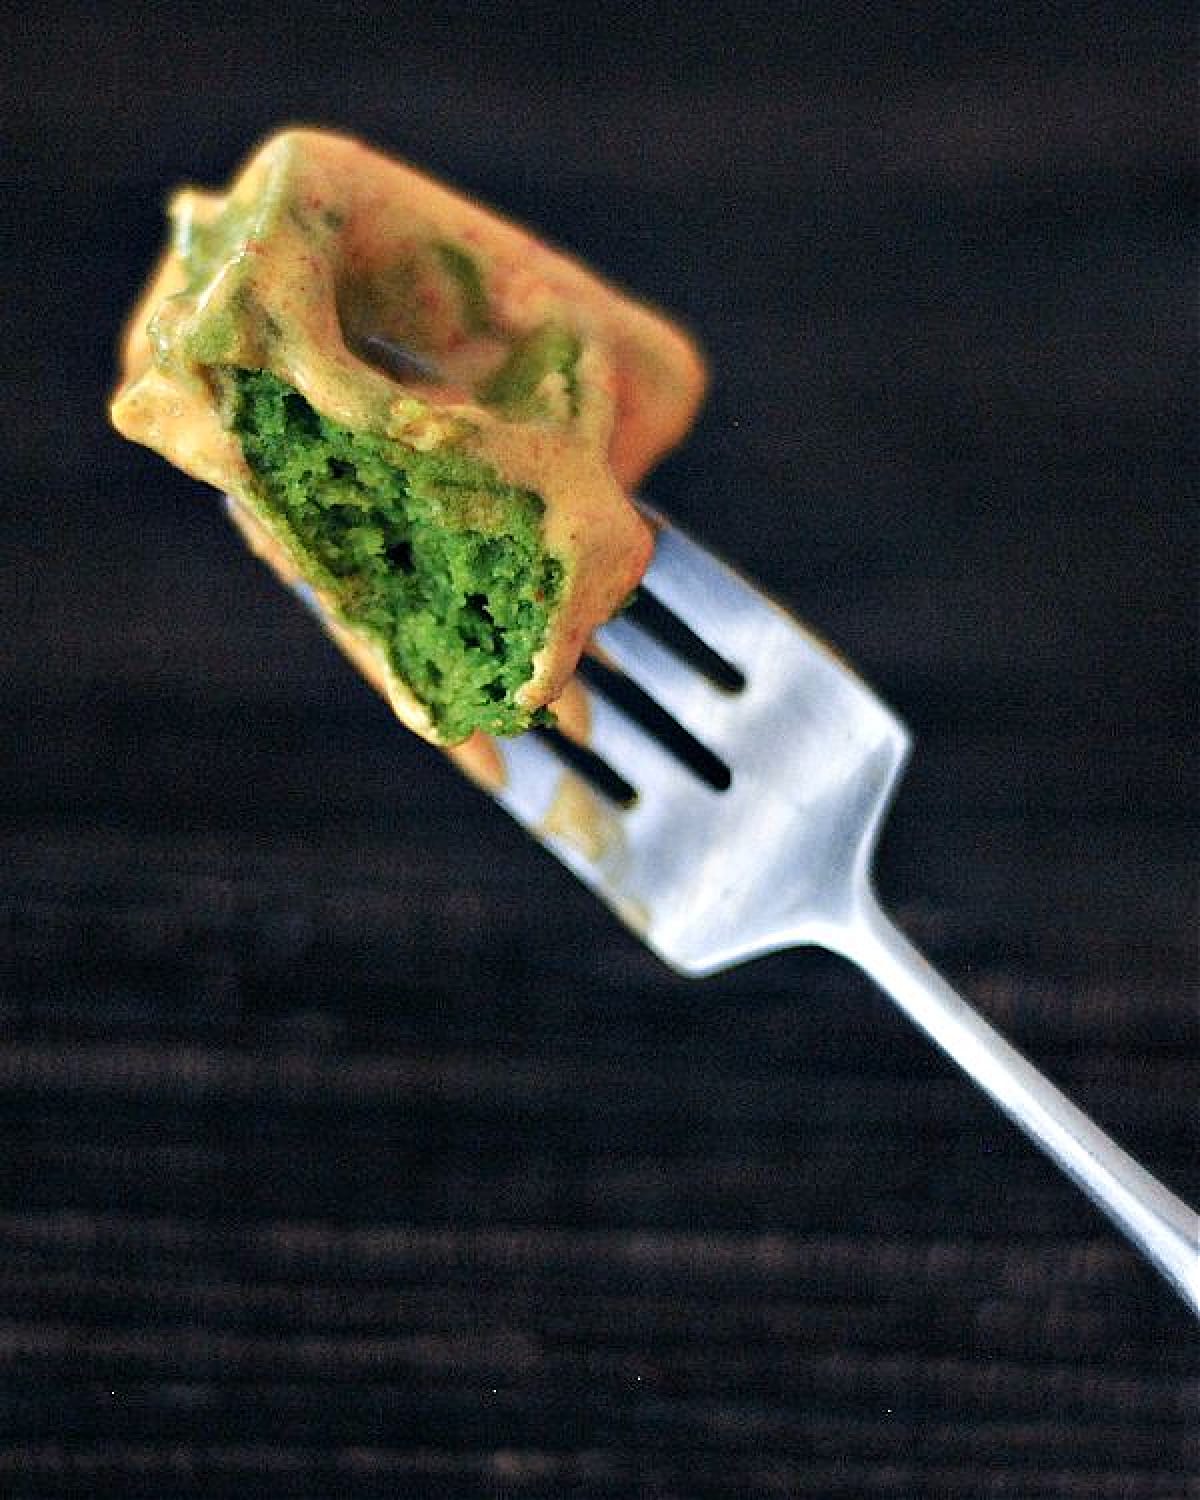 One bite of bright green spinach waffle on a fork, topped with orange colored sriracha whip cream.